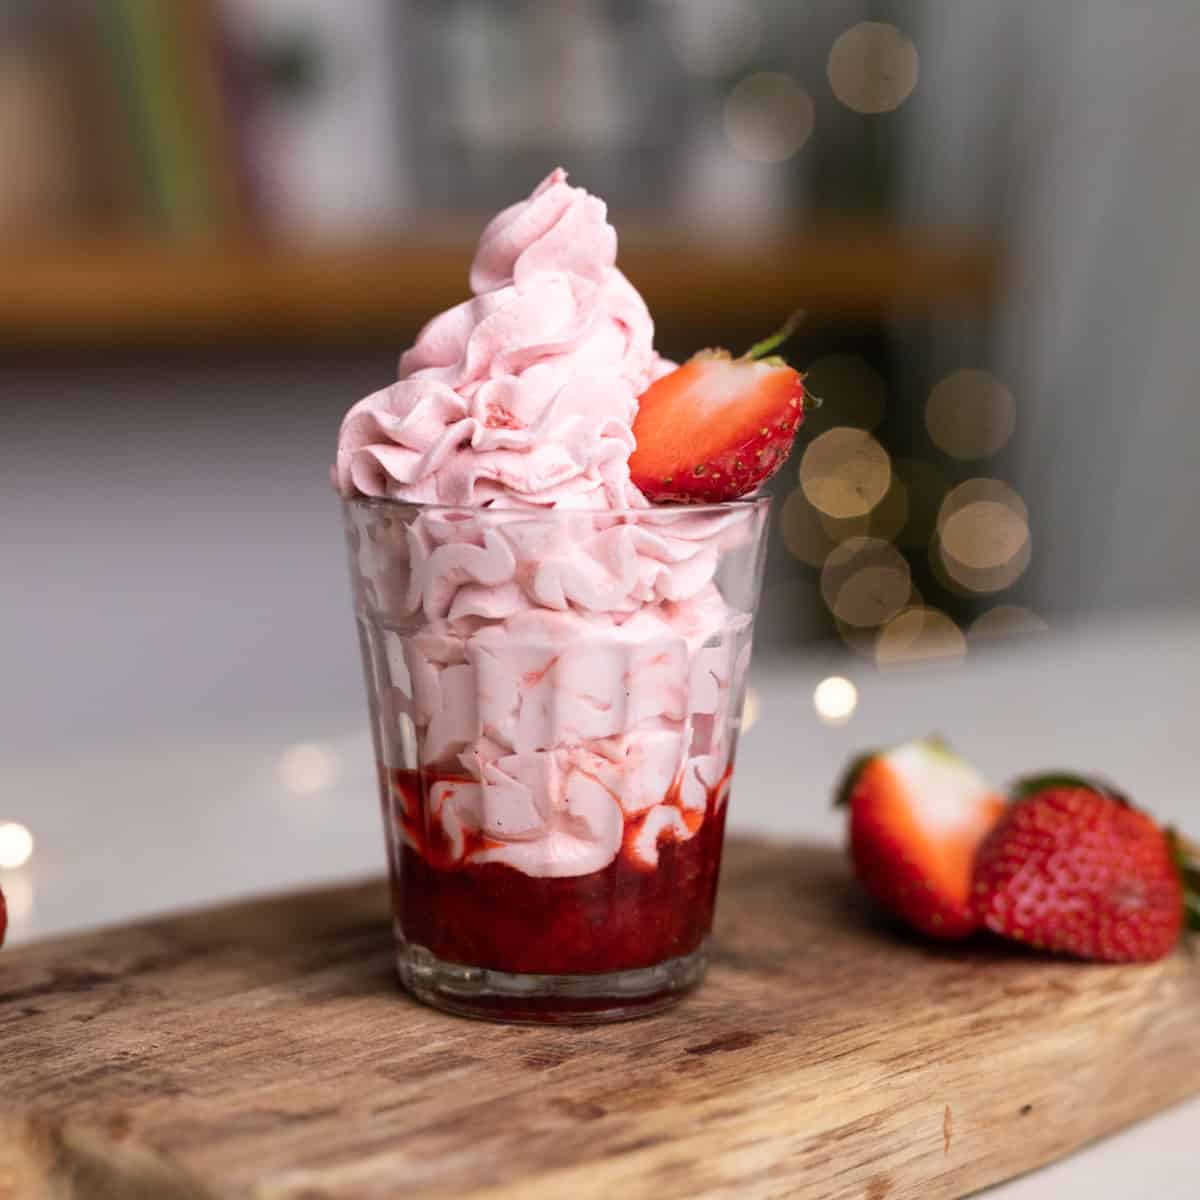 Strawberry mousse layered in a glass with strawberry compote topped with half a strawberry on a wooden board.